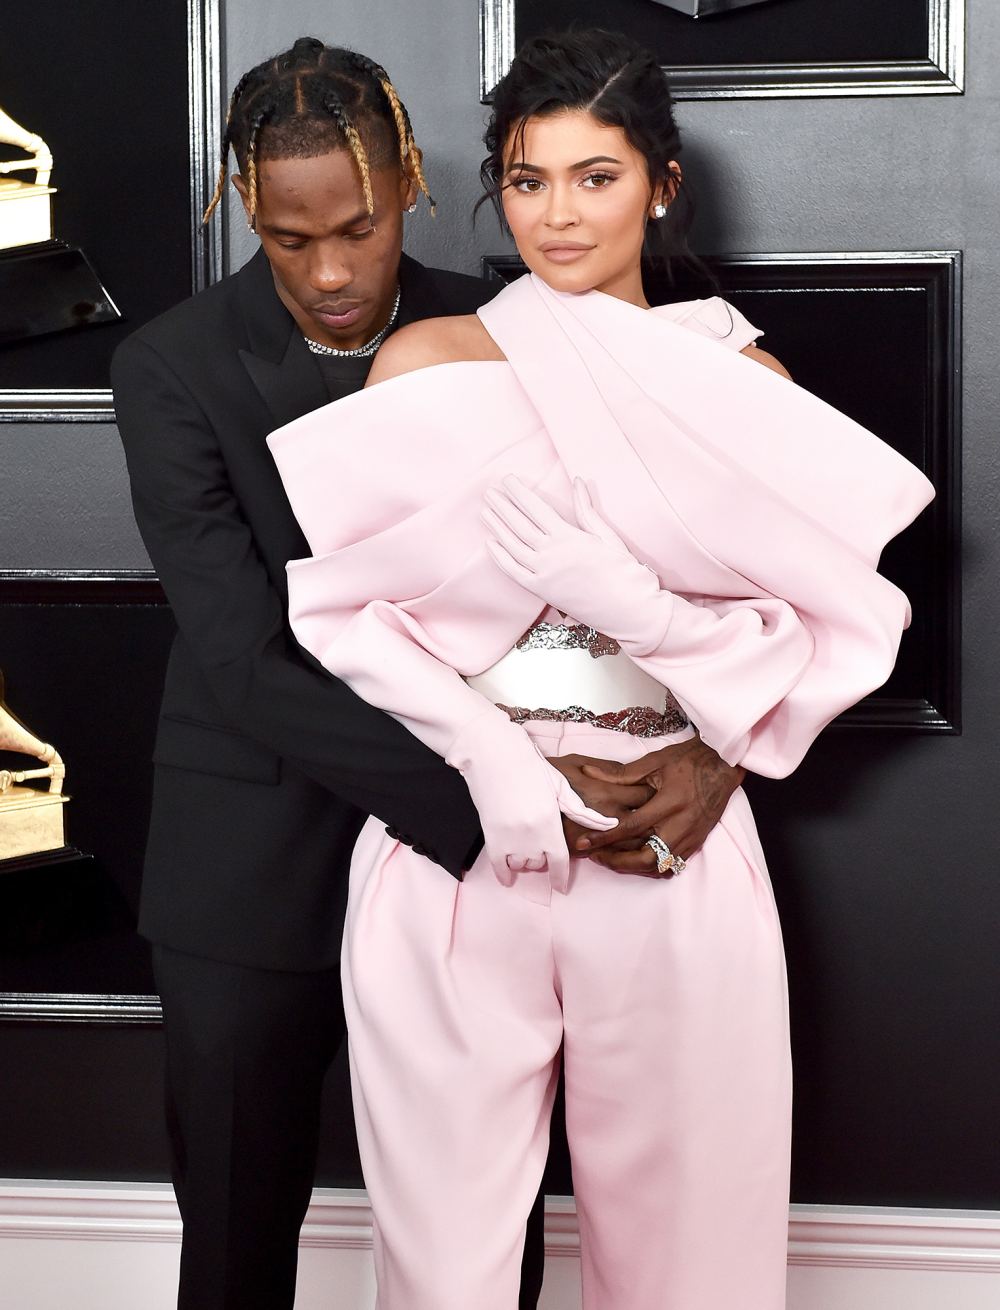 Kylie Jenner Sets the Record Straight About Travis Scott Engagement Rumors